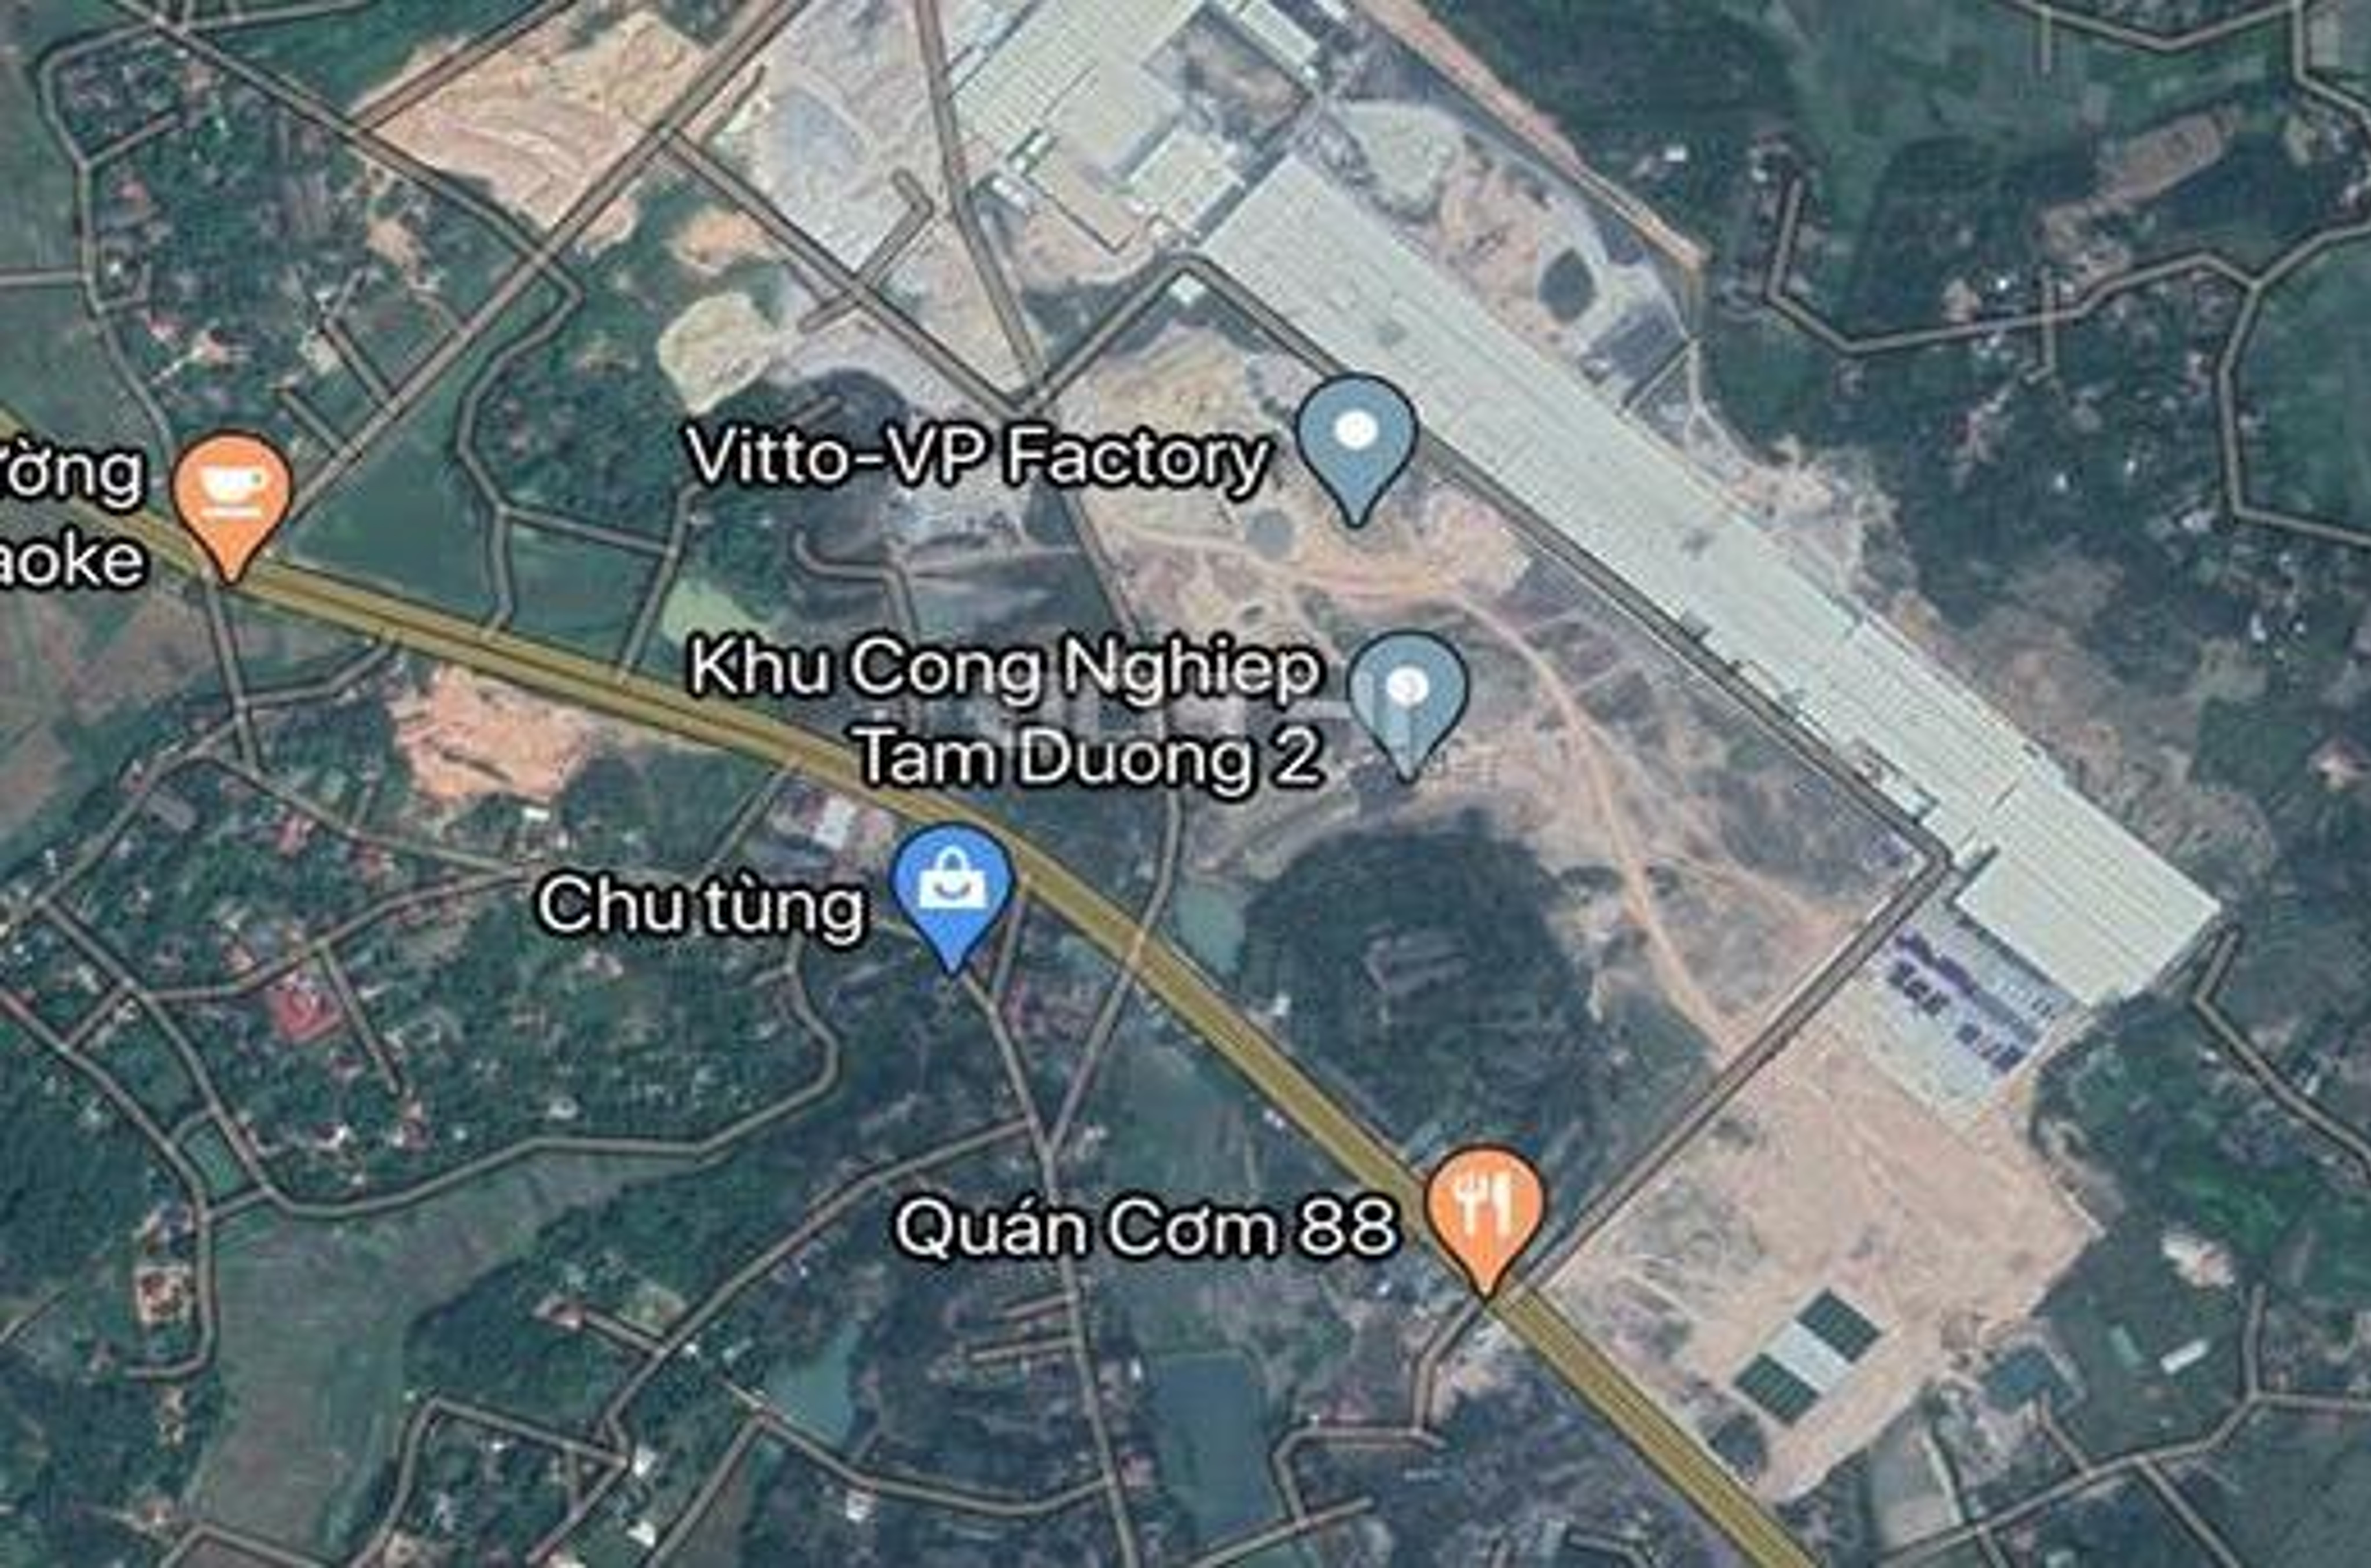 Tam Duong 2 Industrial Park - Zone A